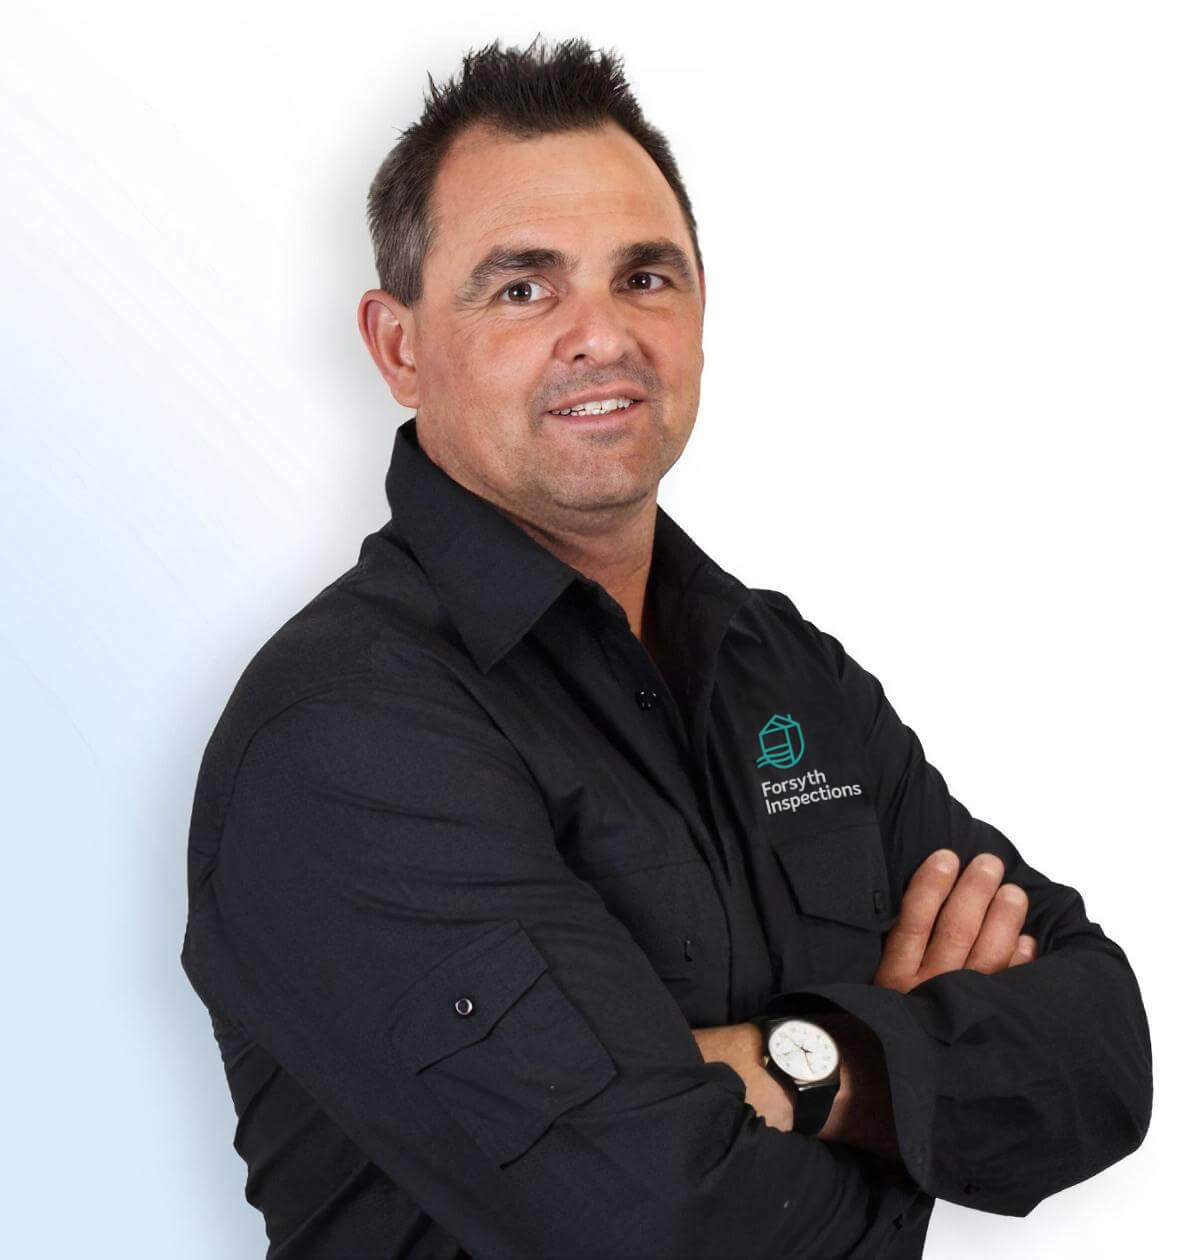 matty-forsyth-inspections-building-property-pool-inspector-banner-1